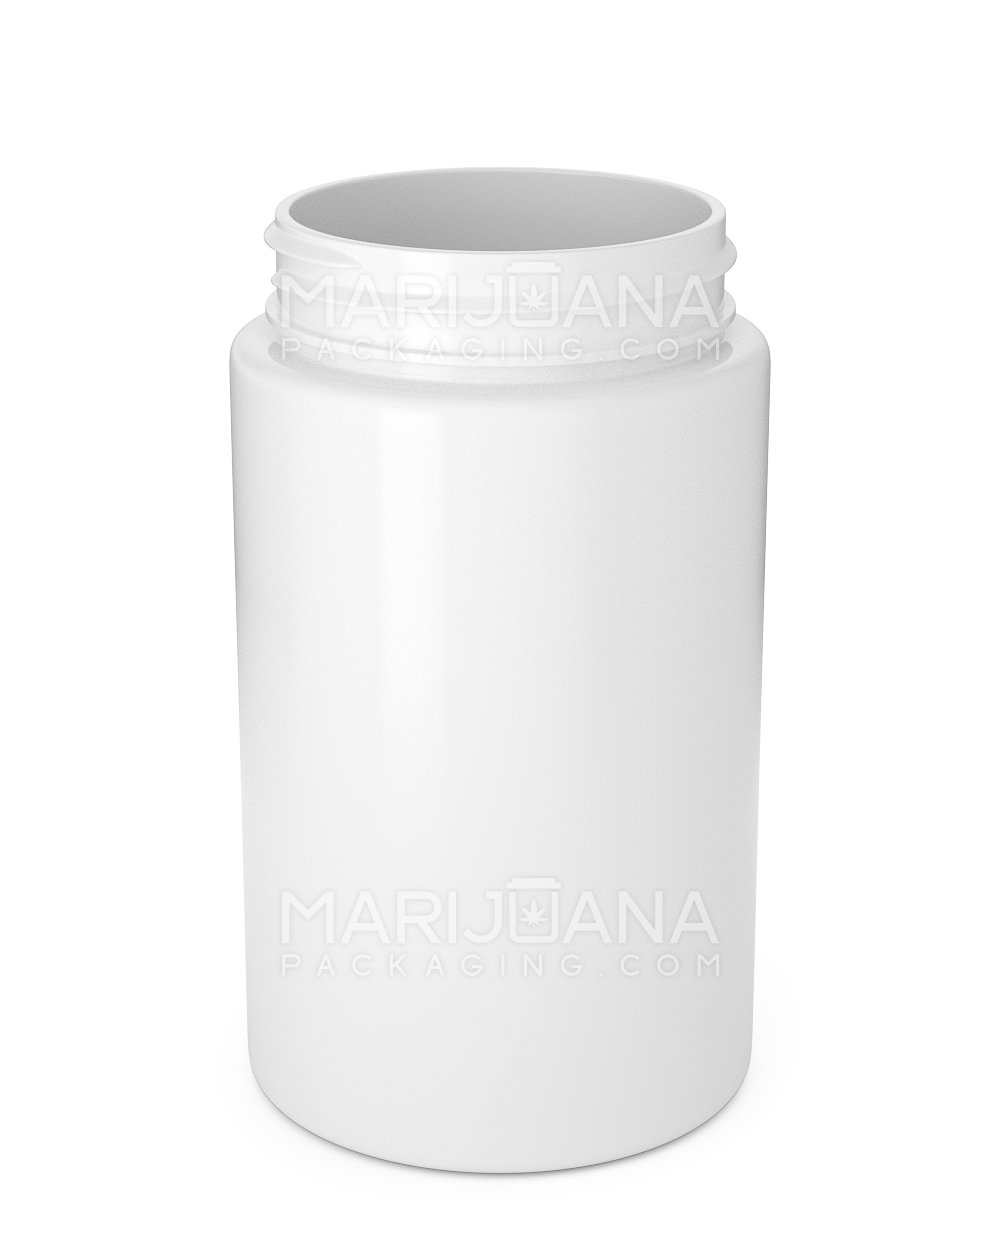 Straight Sided White Plastic Jars | 53mm - 7.5oz - 300 Count - 2